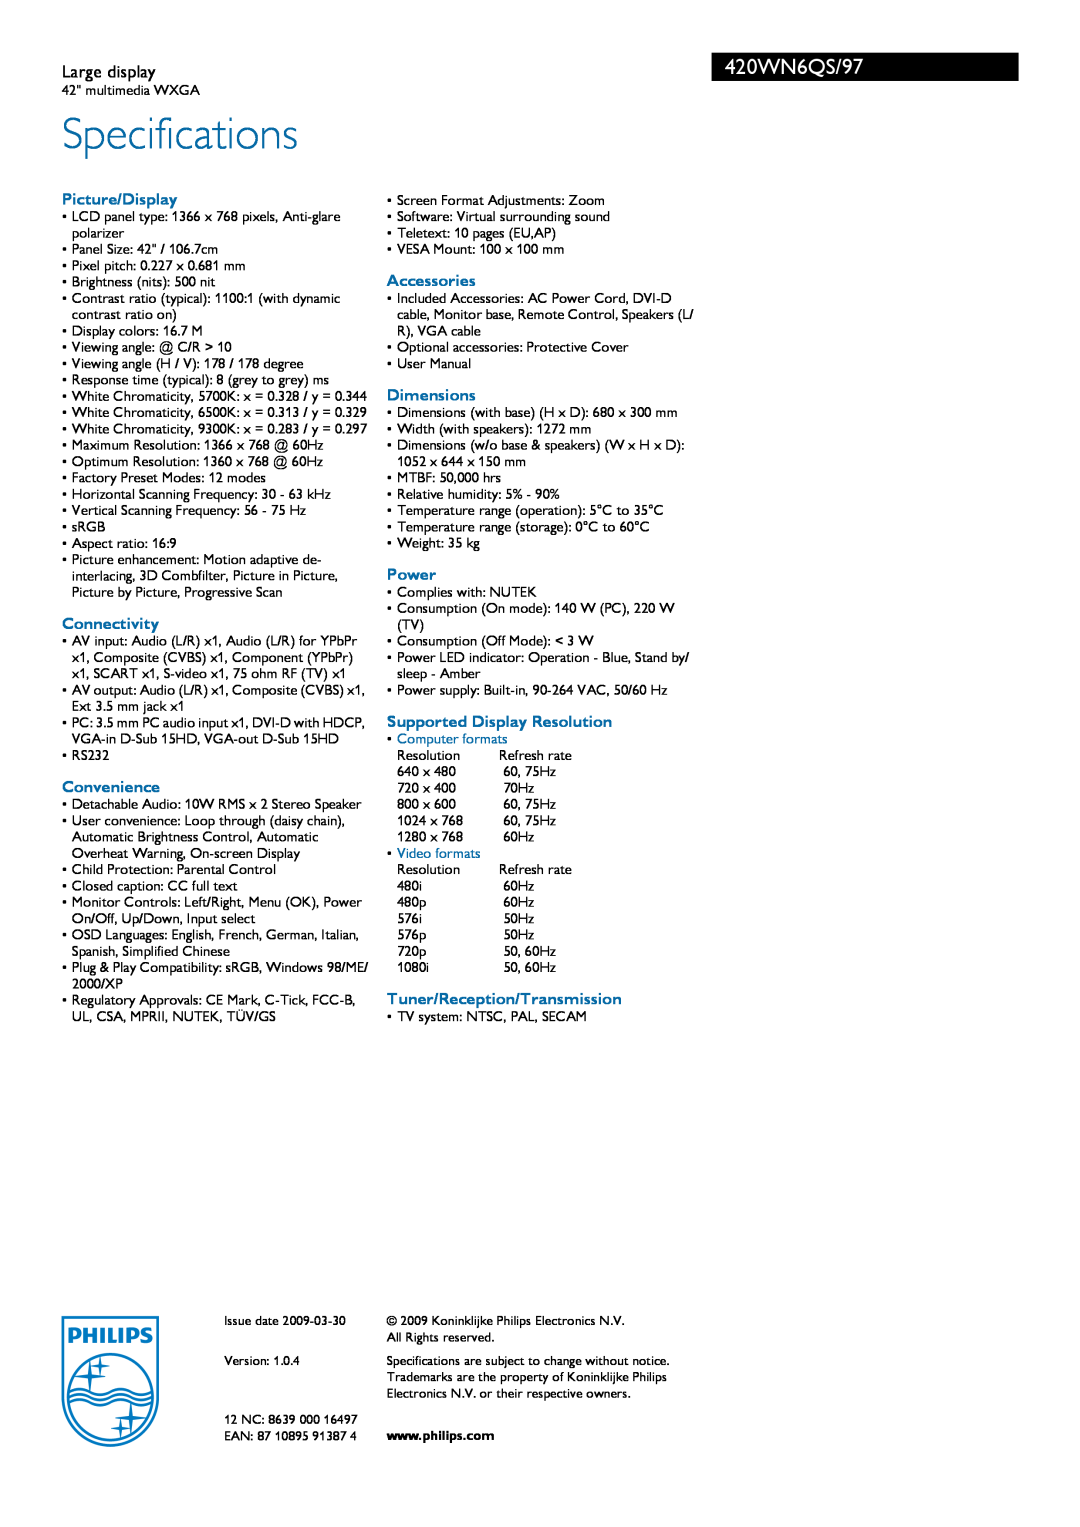 Philips manual Specifications, 420WN6QS/97, Large display, Computer formats, Video formats 